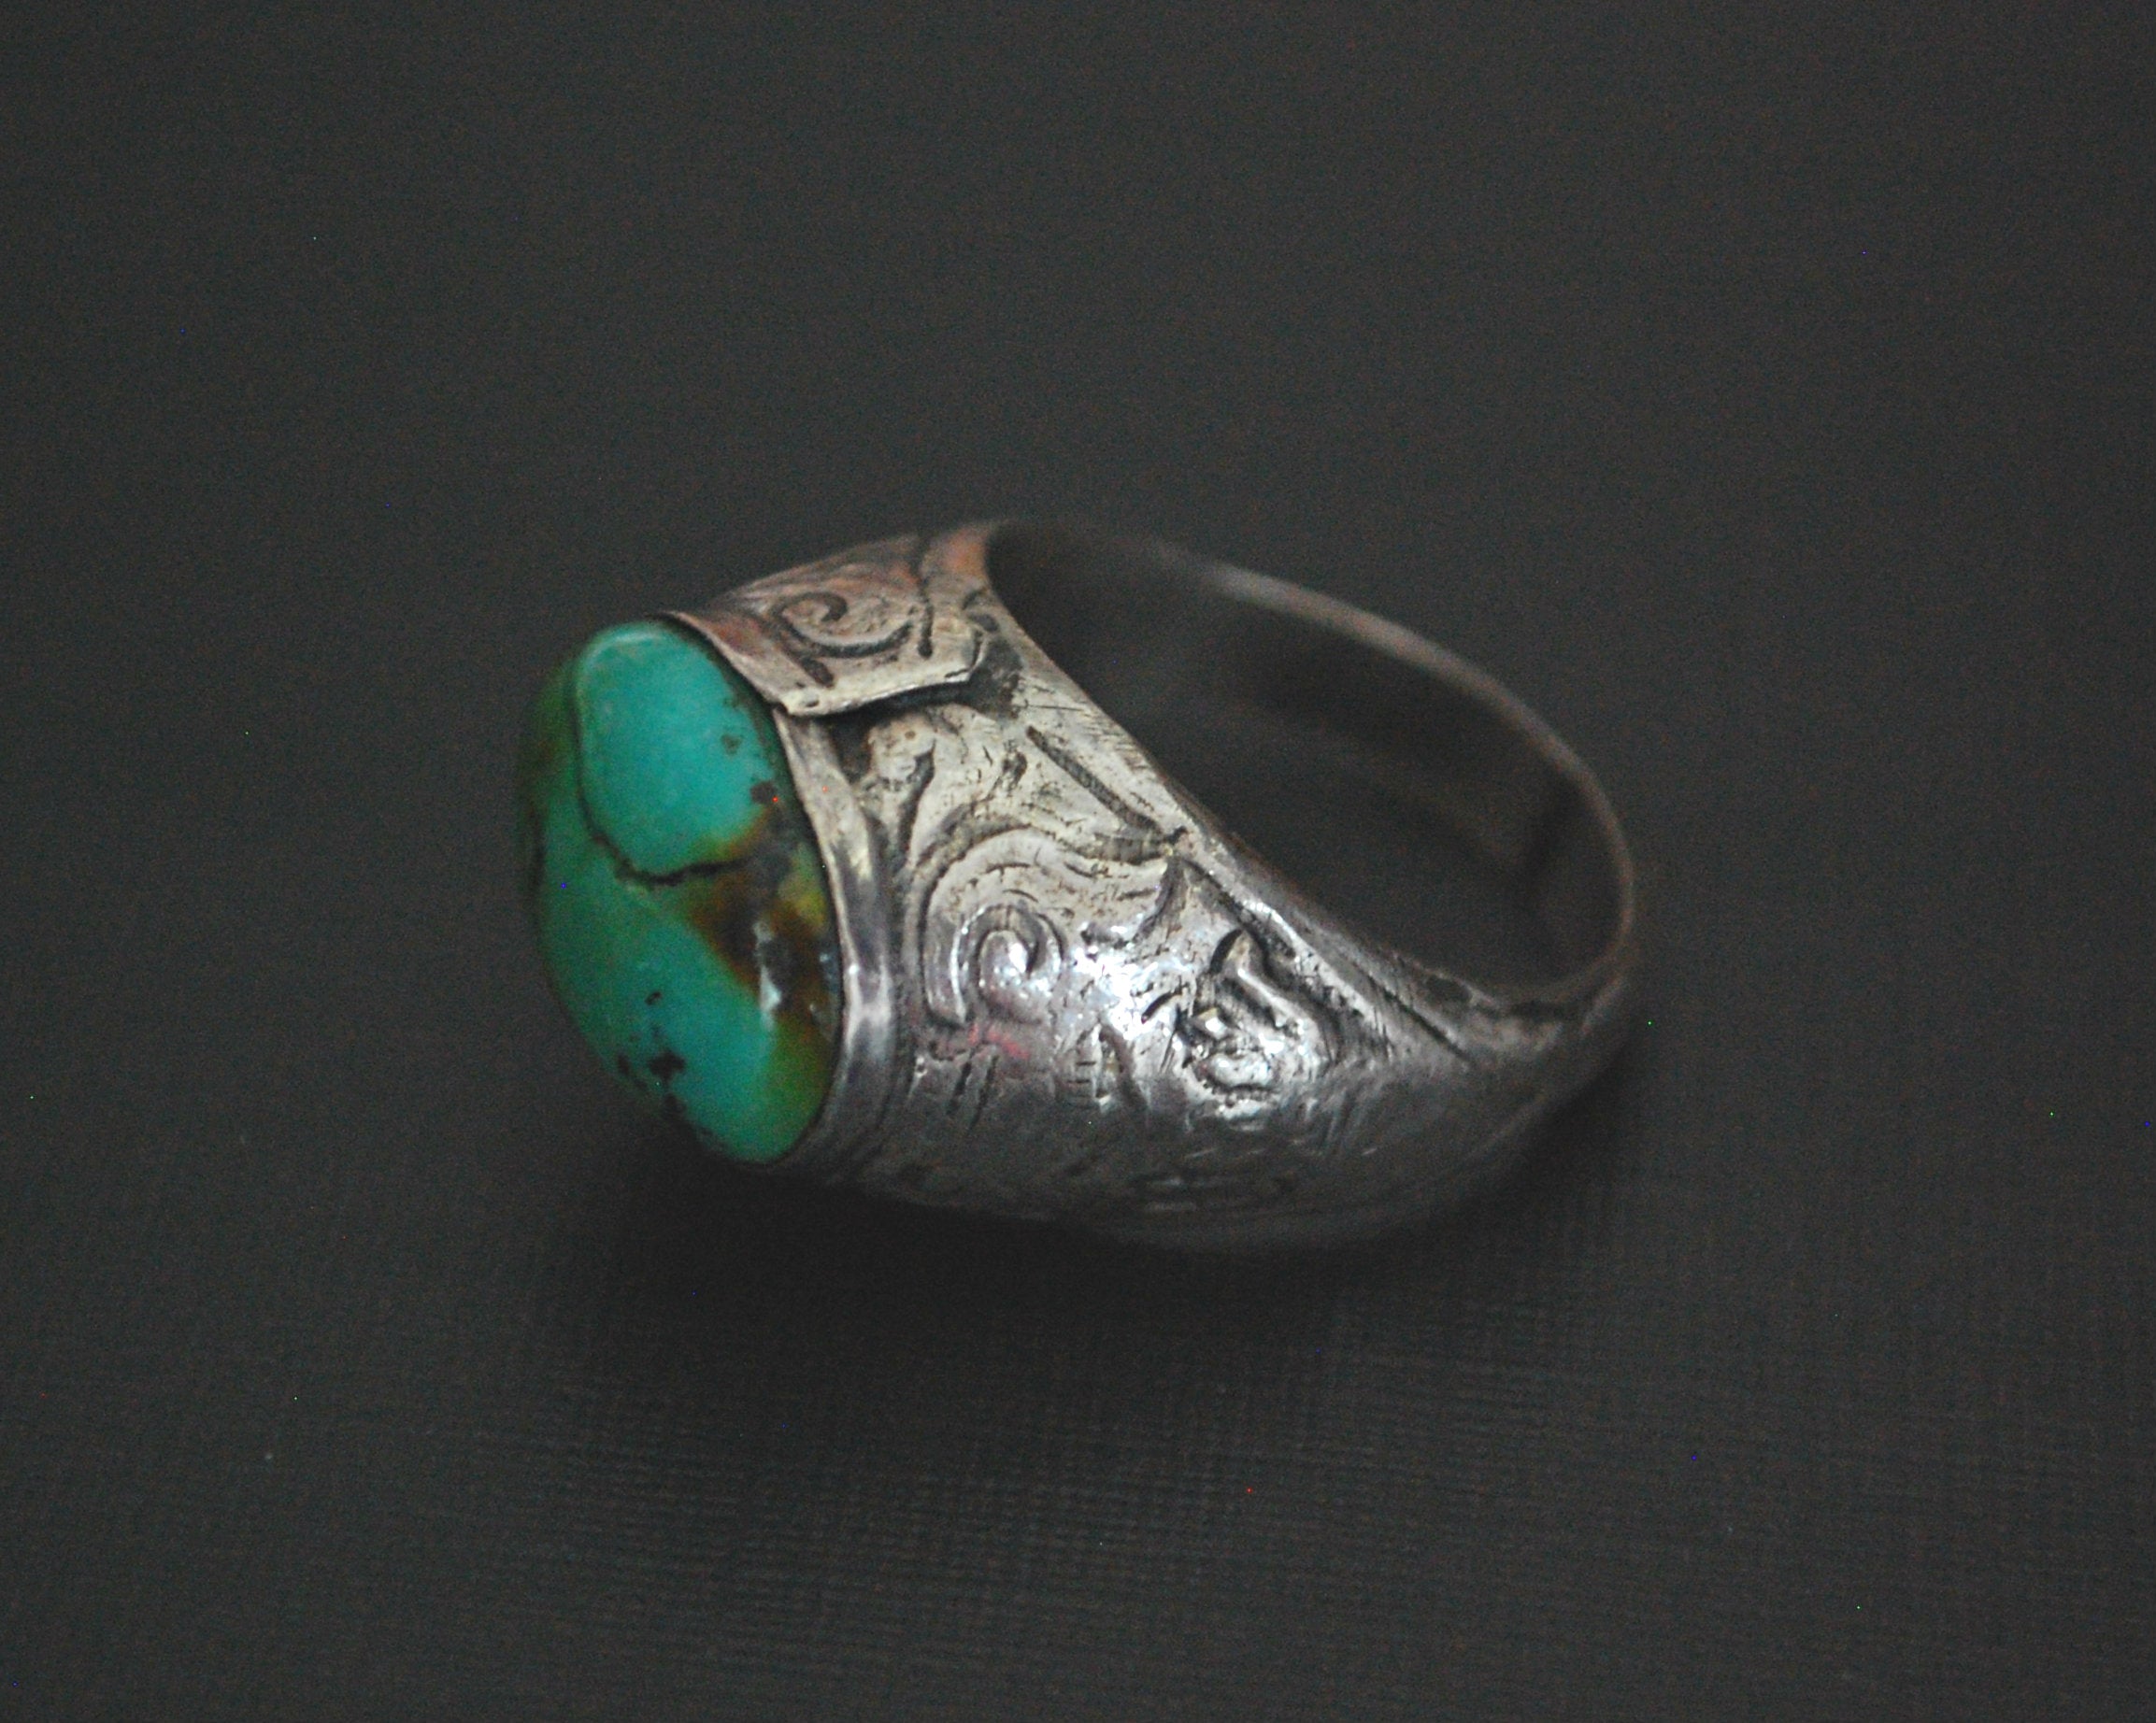 Collectable Afghani Turquoise Silver Ring - Size 9.5